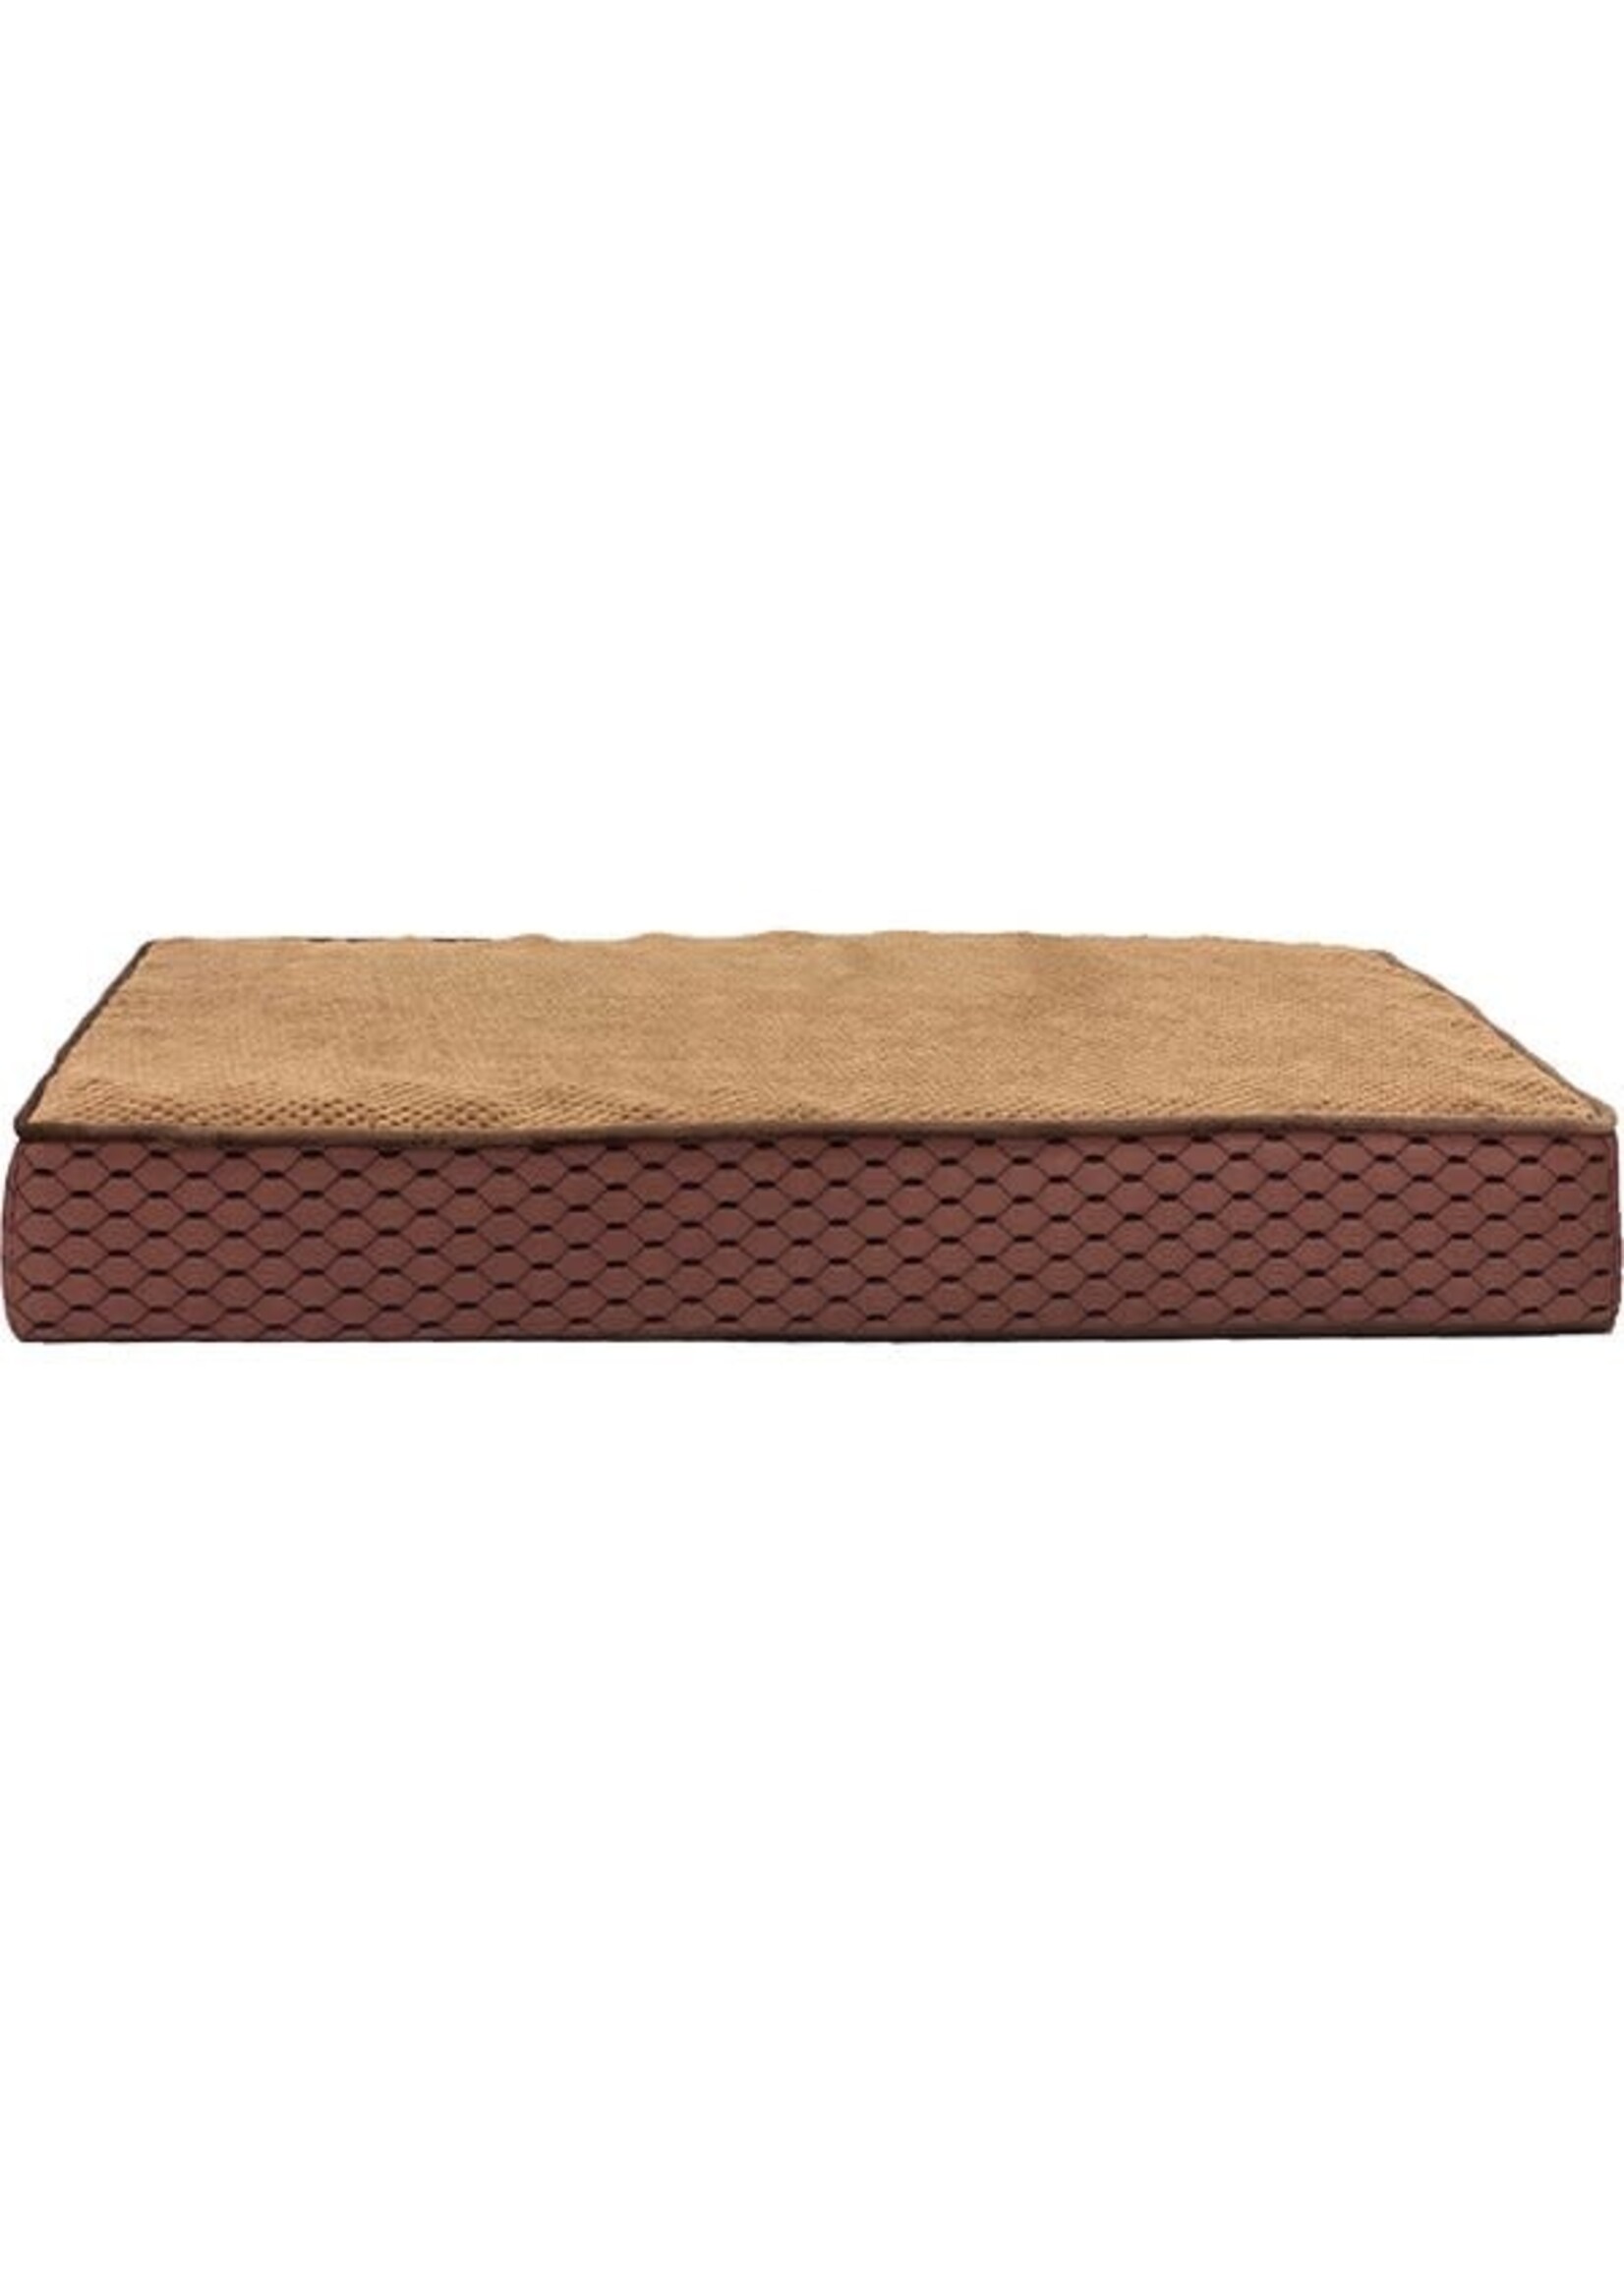 Ethical Ethical Spot Bamboo Orthopedic Pet Bed Brown